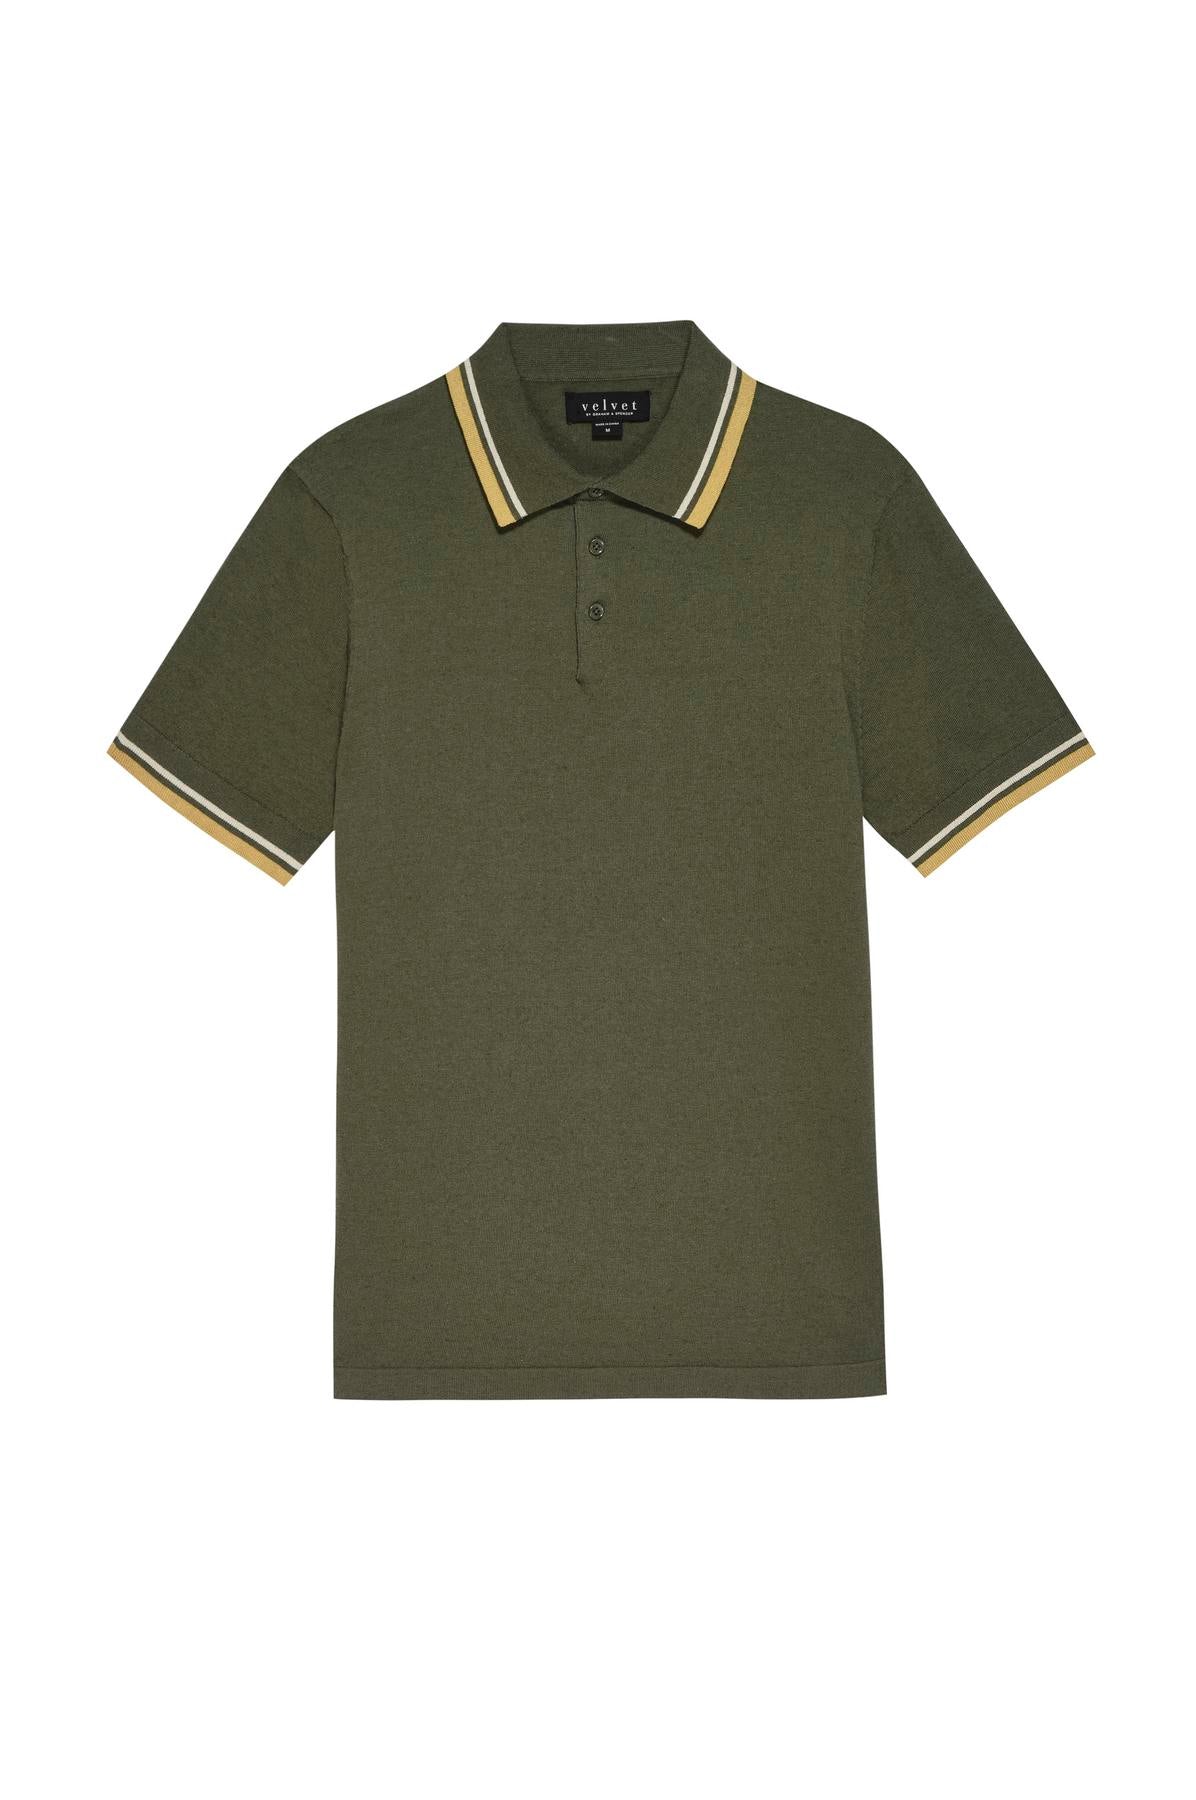 A GREGAN LINEN BLEND POLO shirt from Velvet by Graham & Spencer with yellow trim.-26678938337473